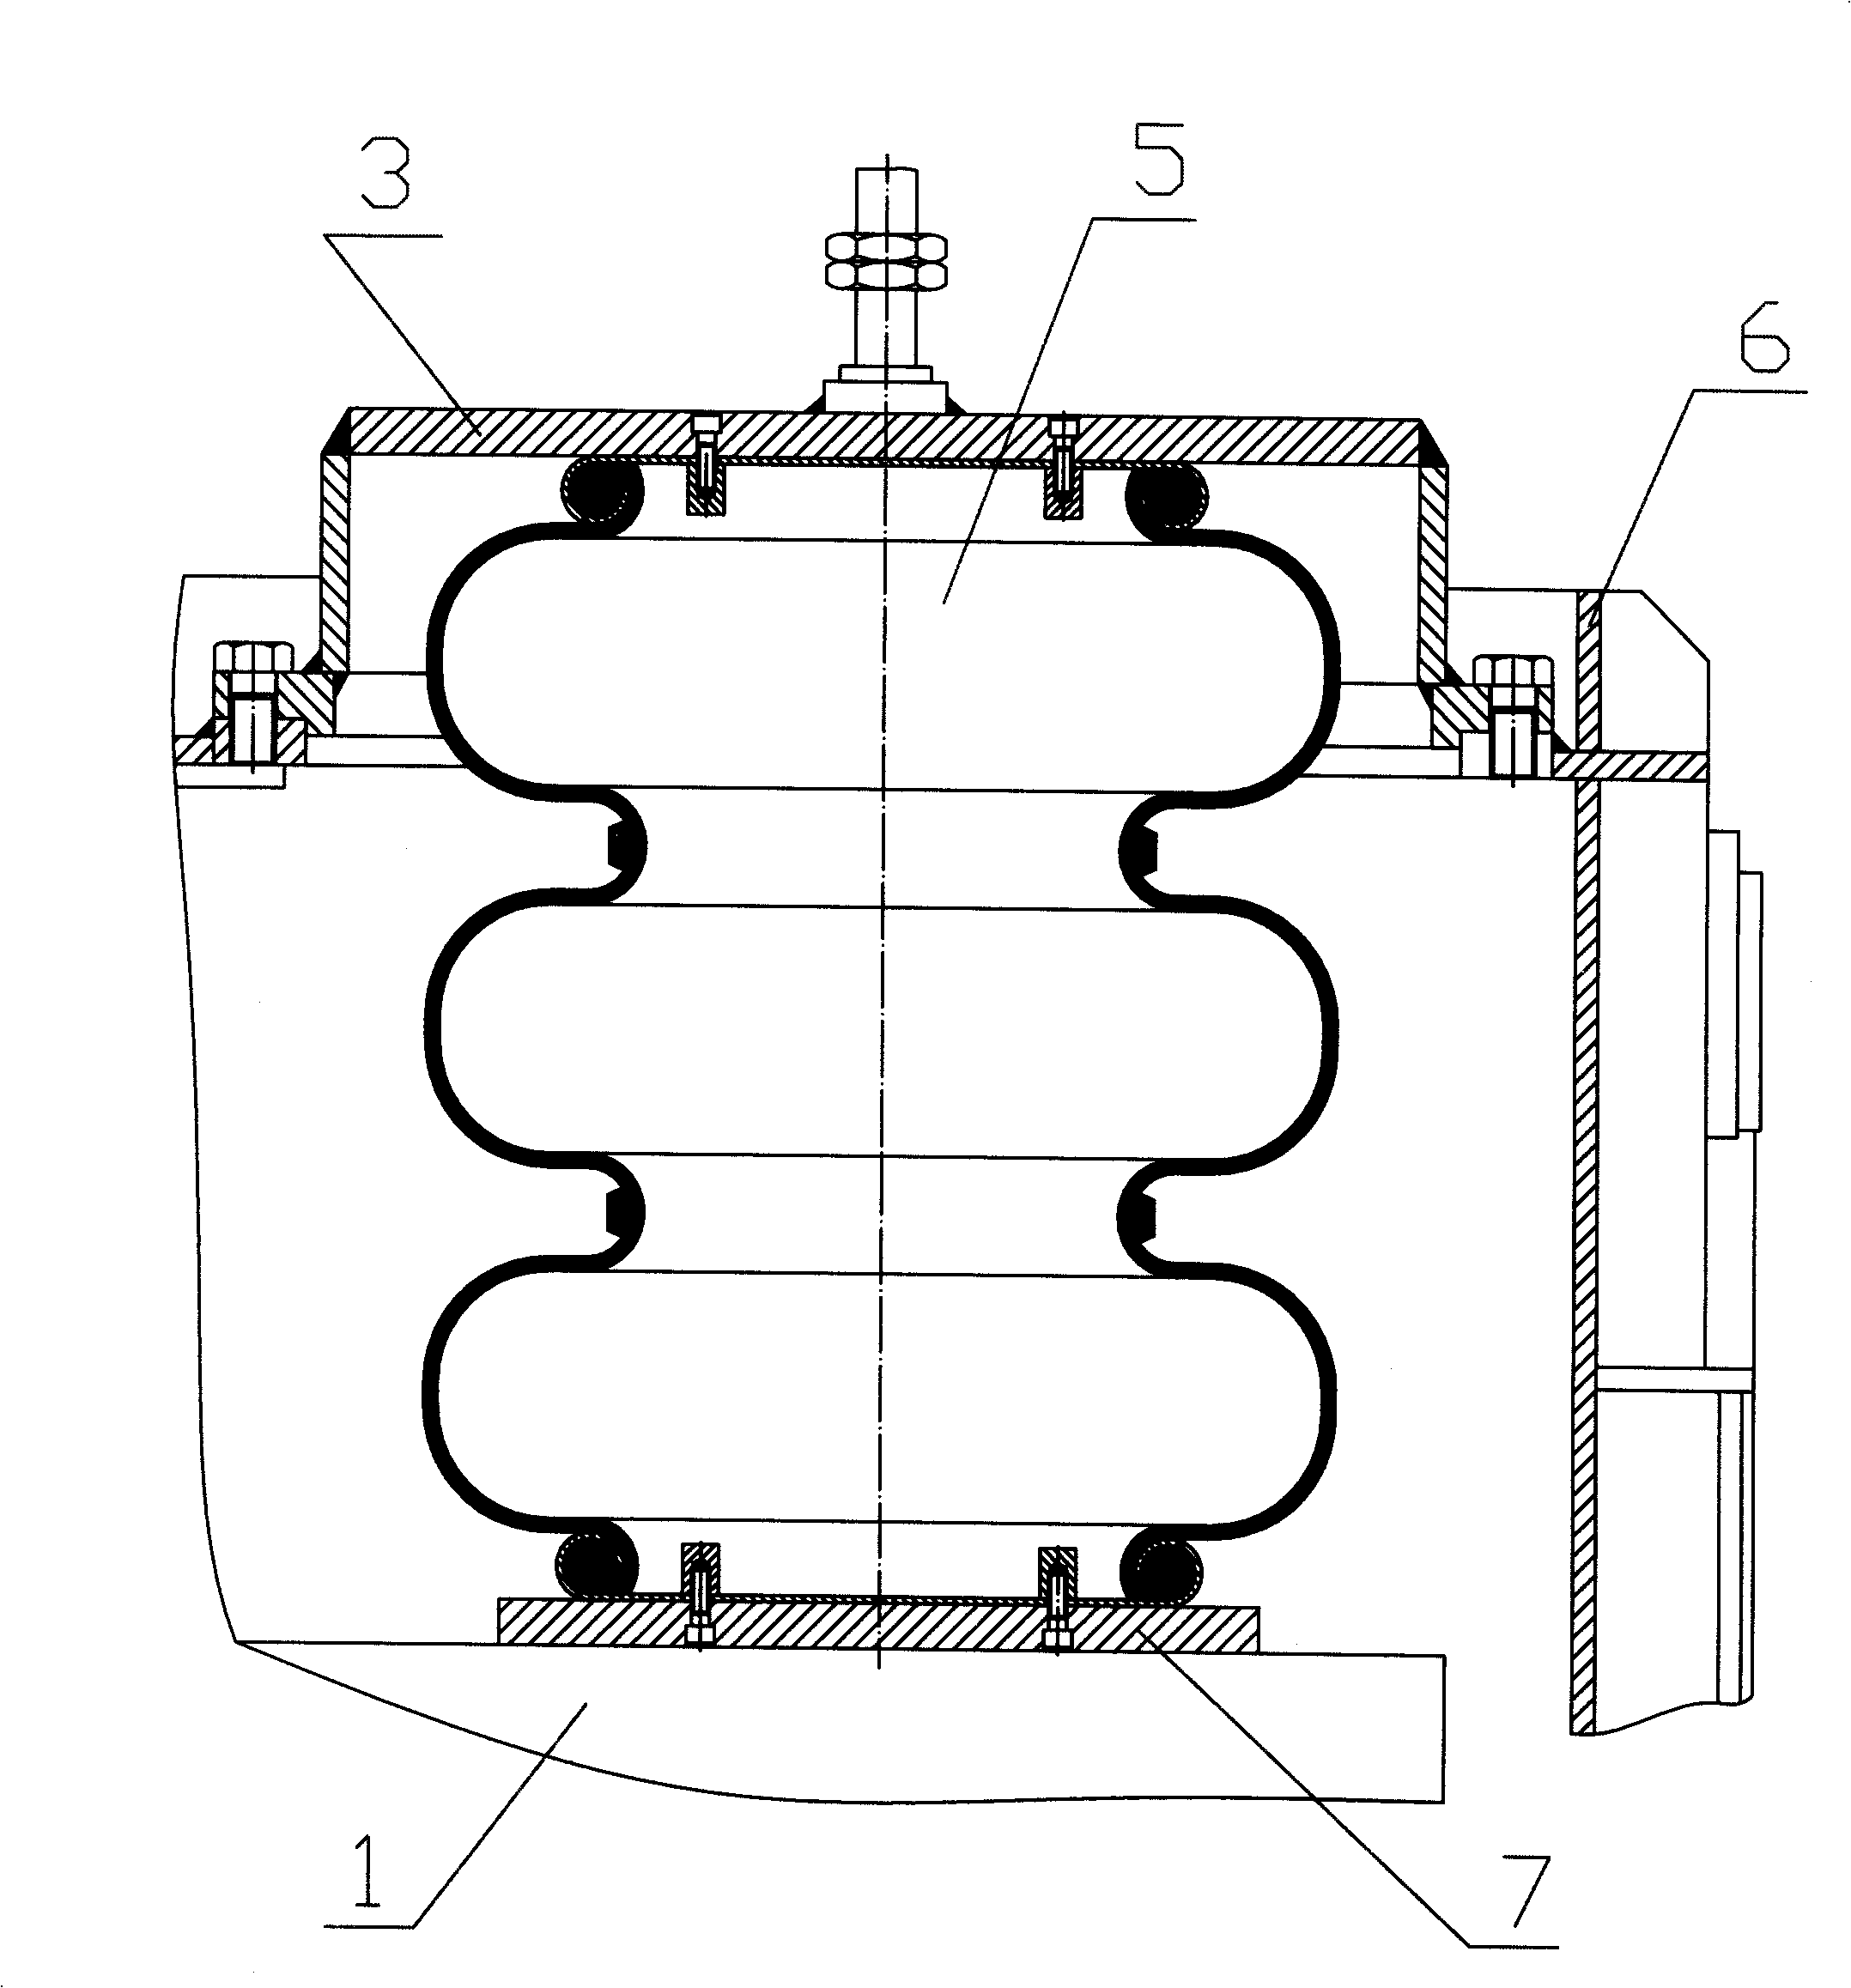 Double-air sac structure of vibration moulding machine